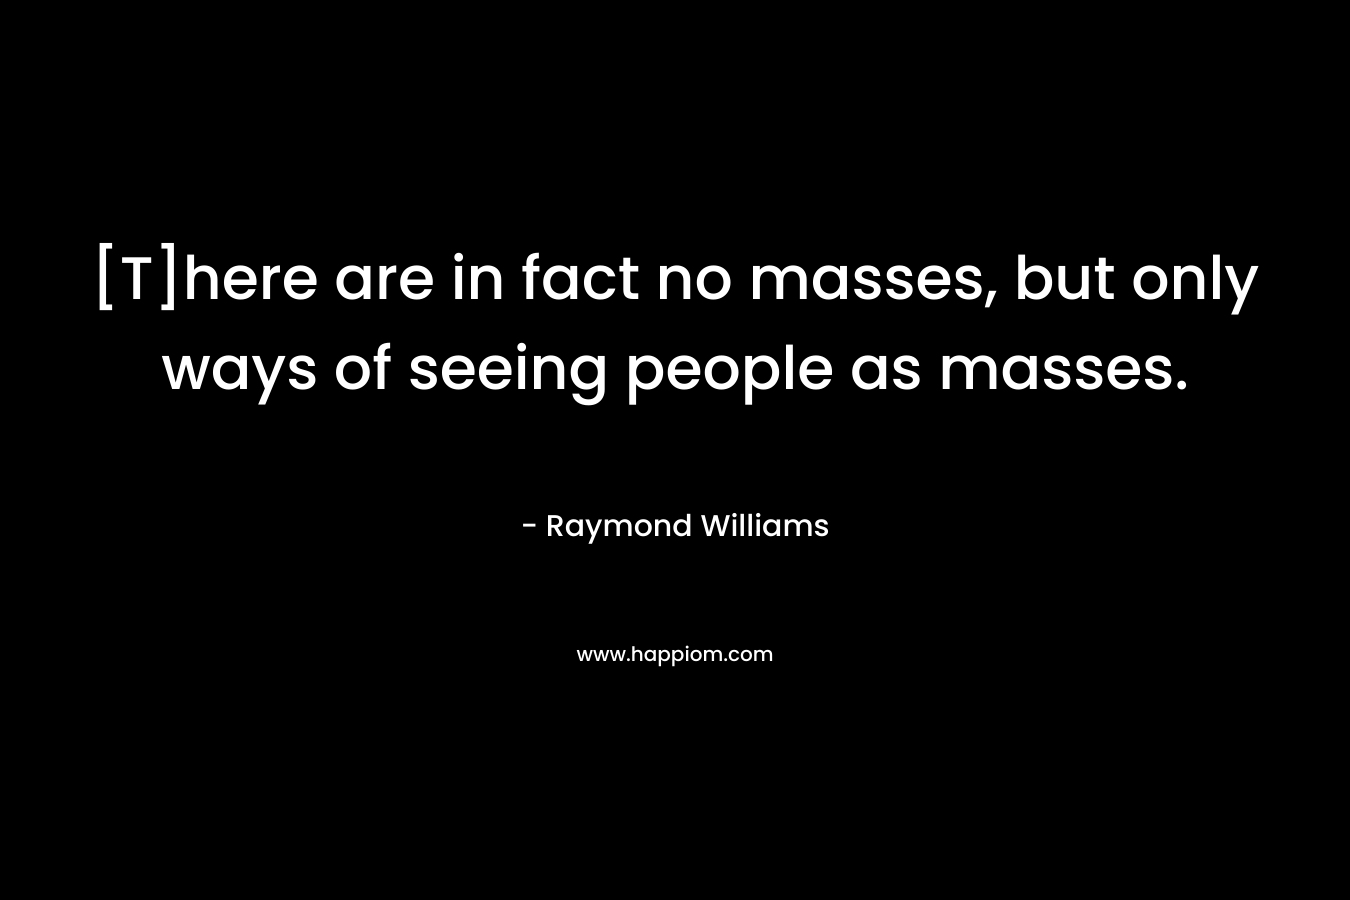 [T]here are in fact no masses, but only ways of seeing people as masses.